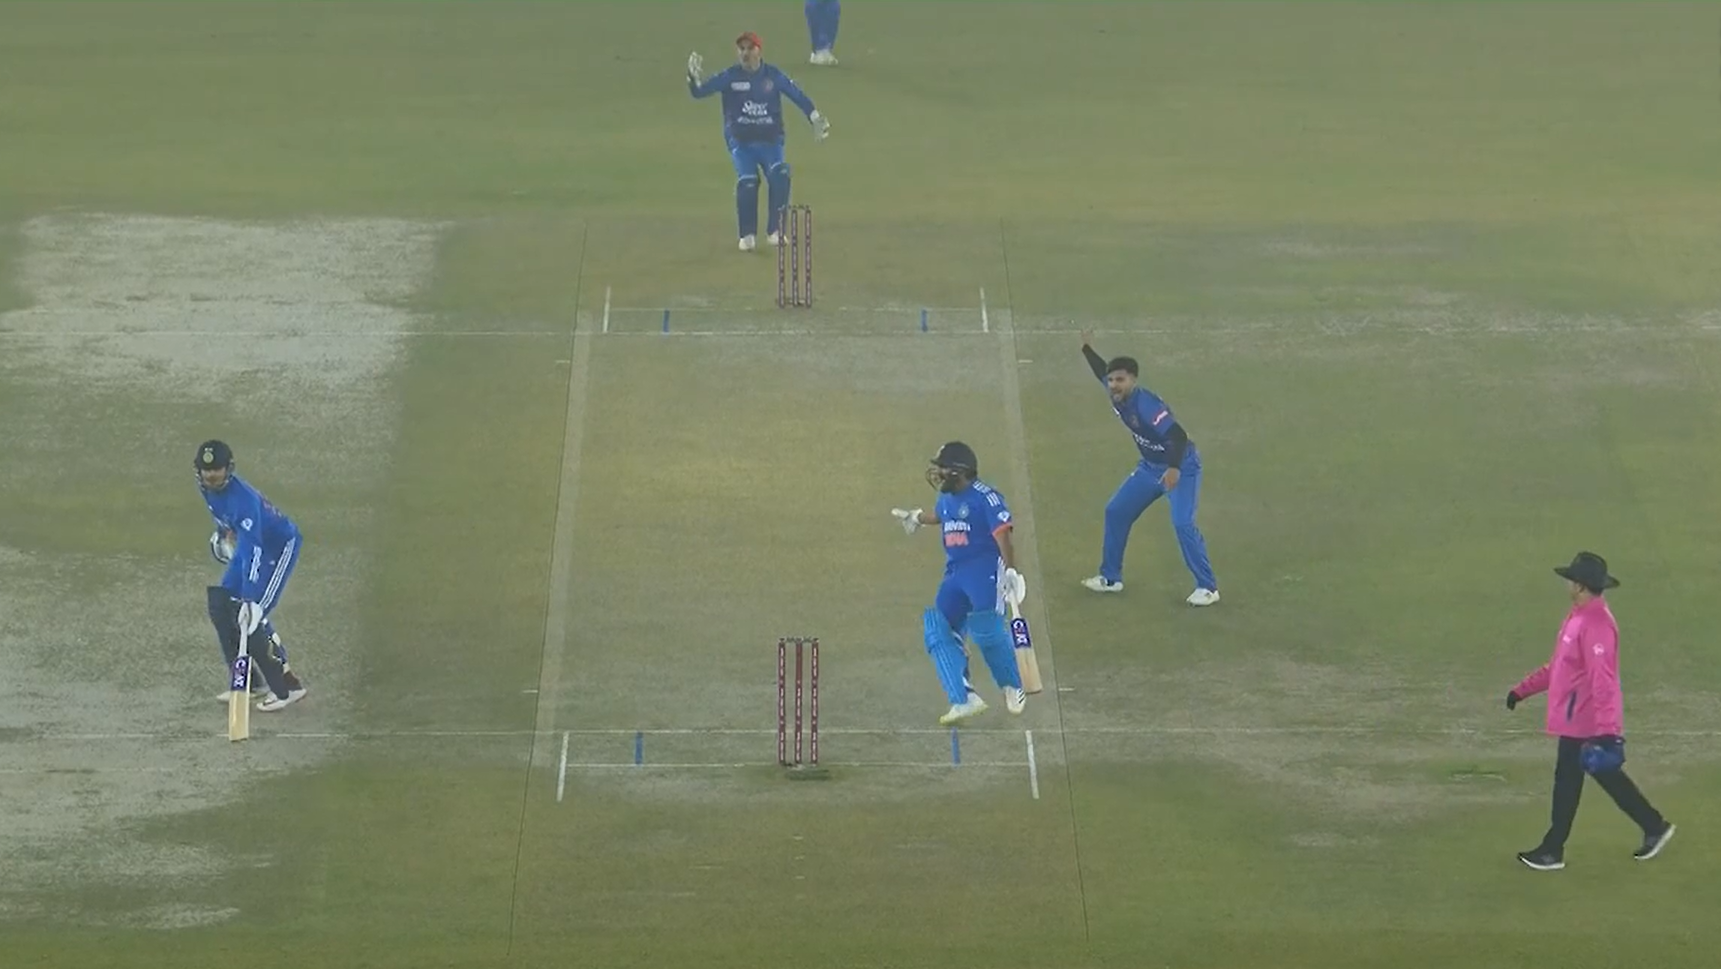 [WATCH] Horrible Mix-Up Costs Rohit Sharma’s Wicket During First T20I Against Afghanistan